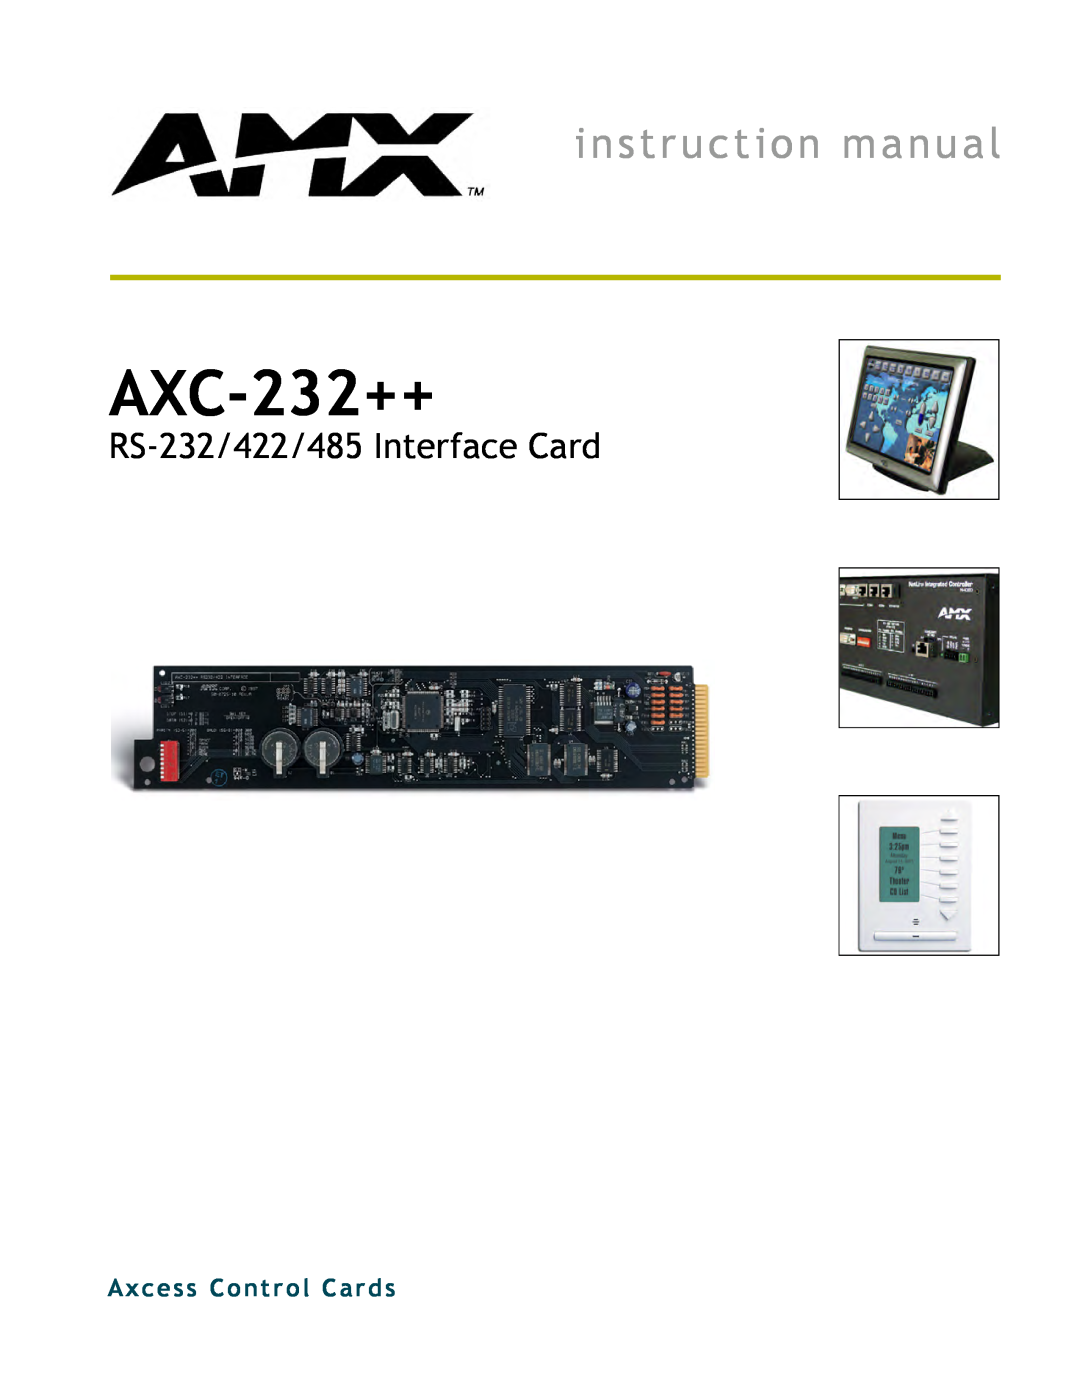 AMX AXC-232++ instruction manual RS-232/422/485 Interface Card, Axcess Control Cards 